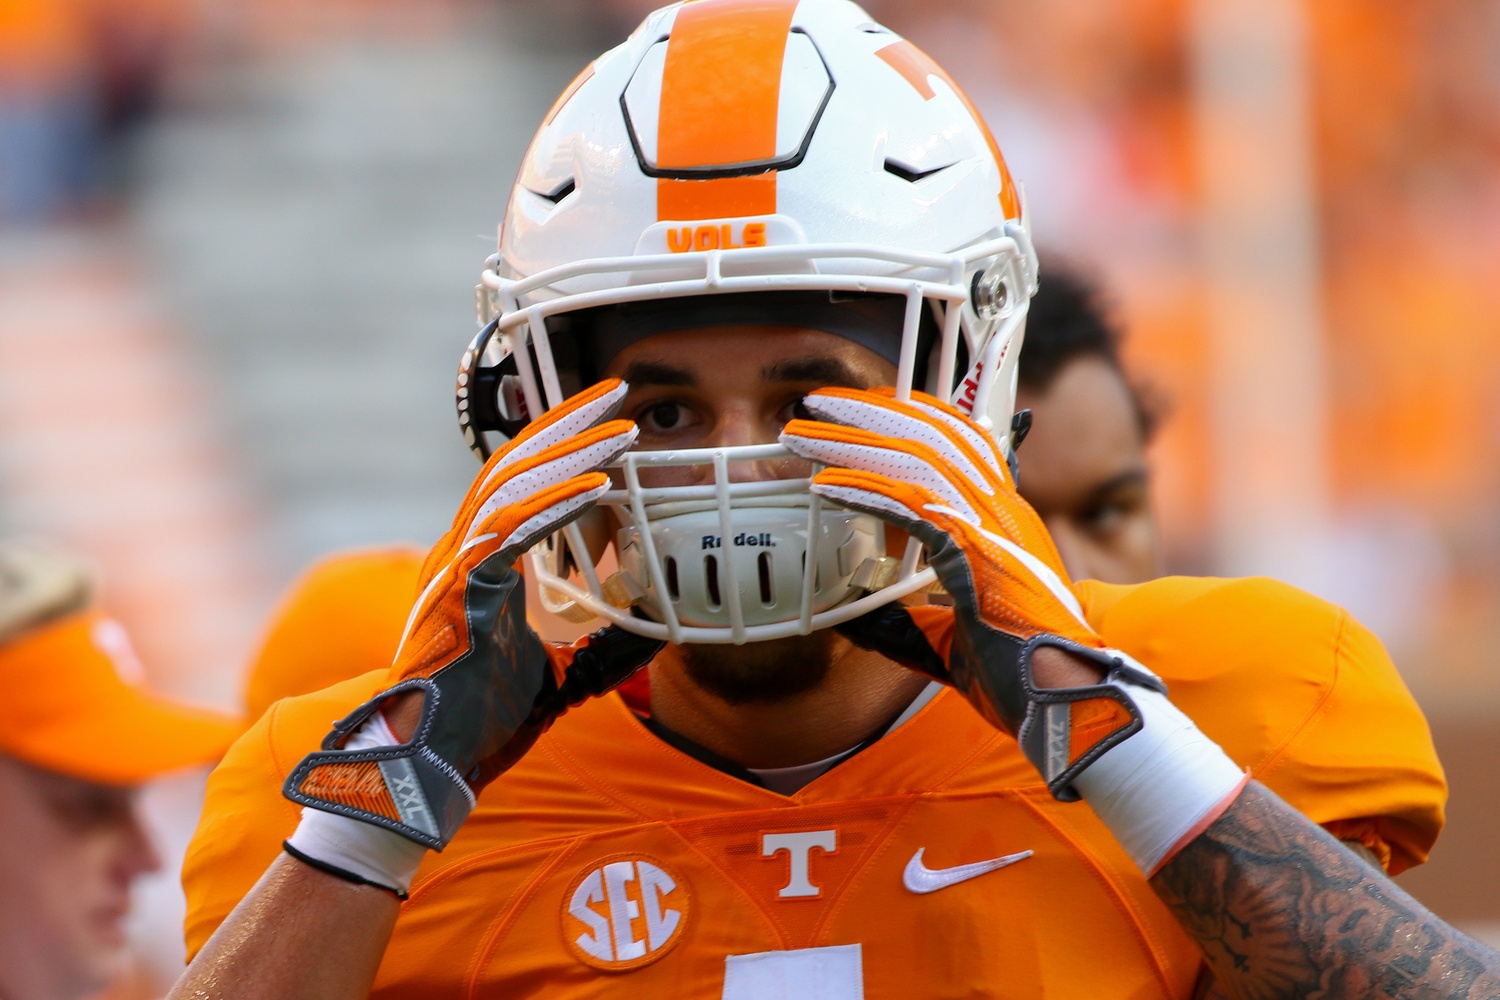 Sep 1, 2016; Knoxville, TN, USA; Tennessee Volunteers running back Jalen Hurd (1) before the game against the Appalachian State Mountaineers at Neyland Stadium. Mandatory Credit: Randy Sartin-USA TODAY Sports